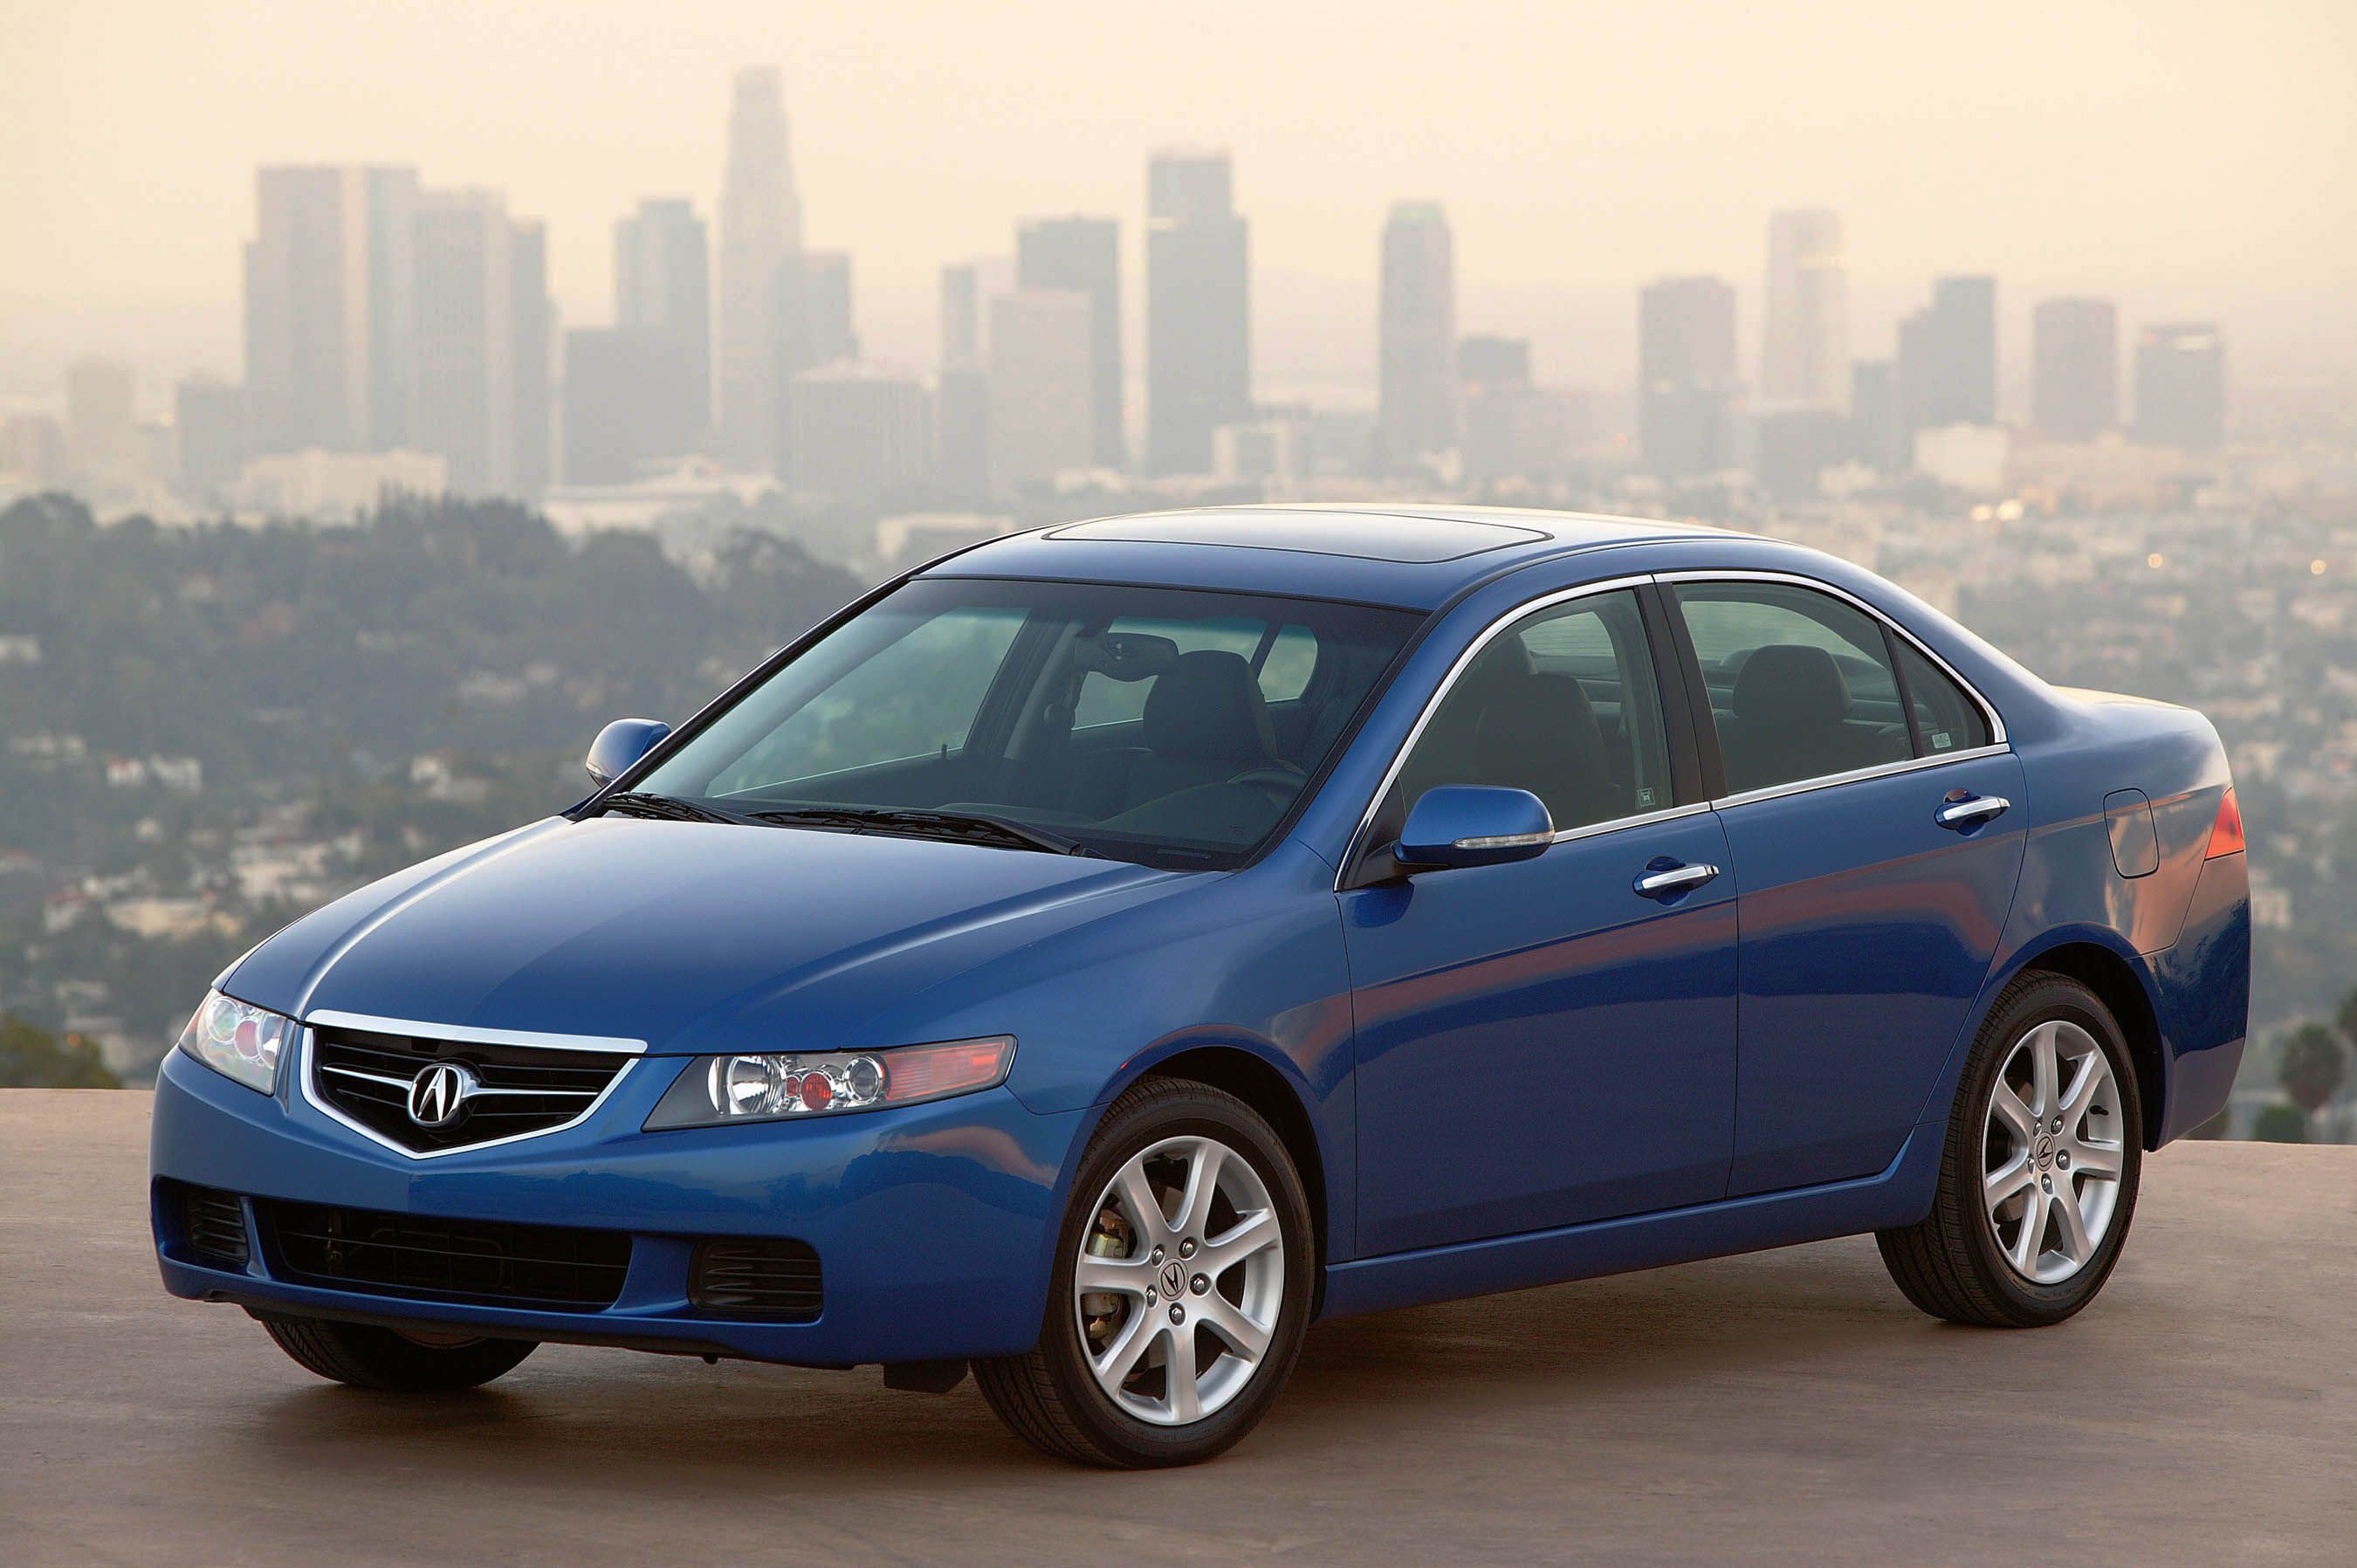 Acura-TSX-(First-Generation)-1